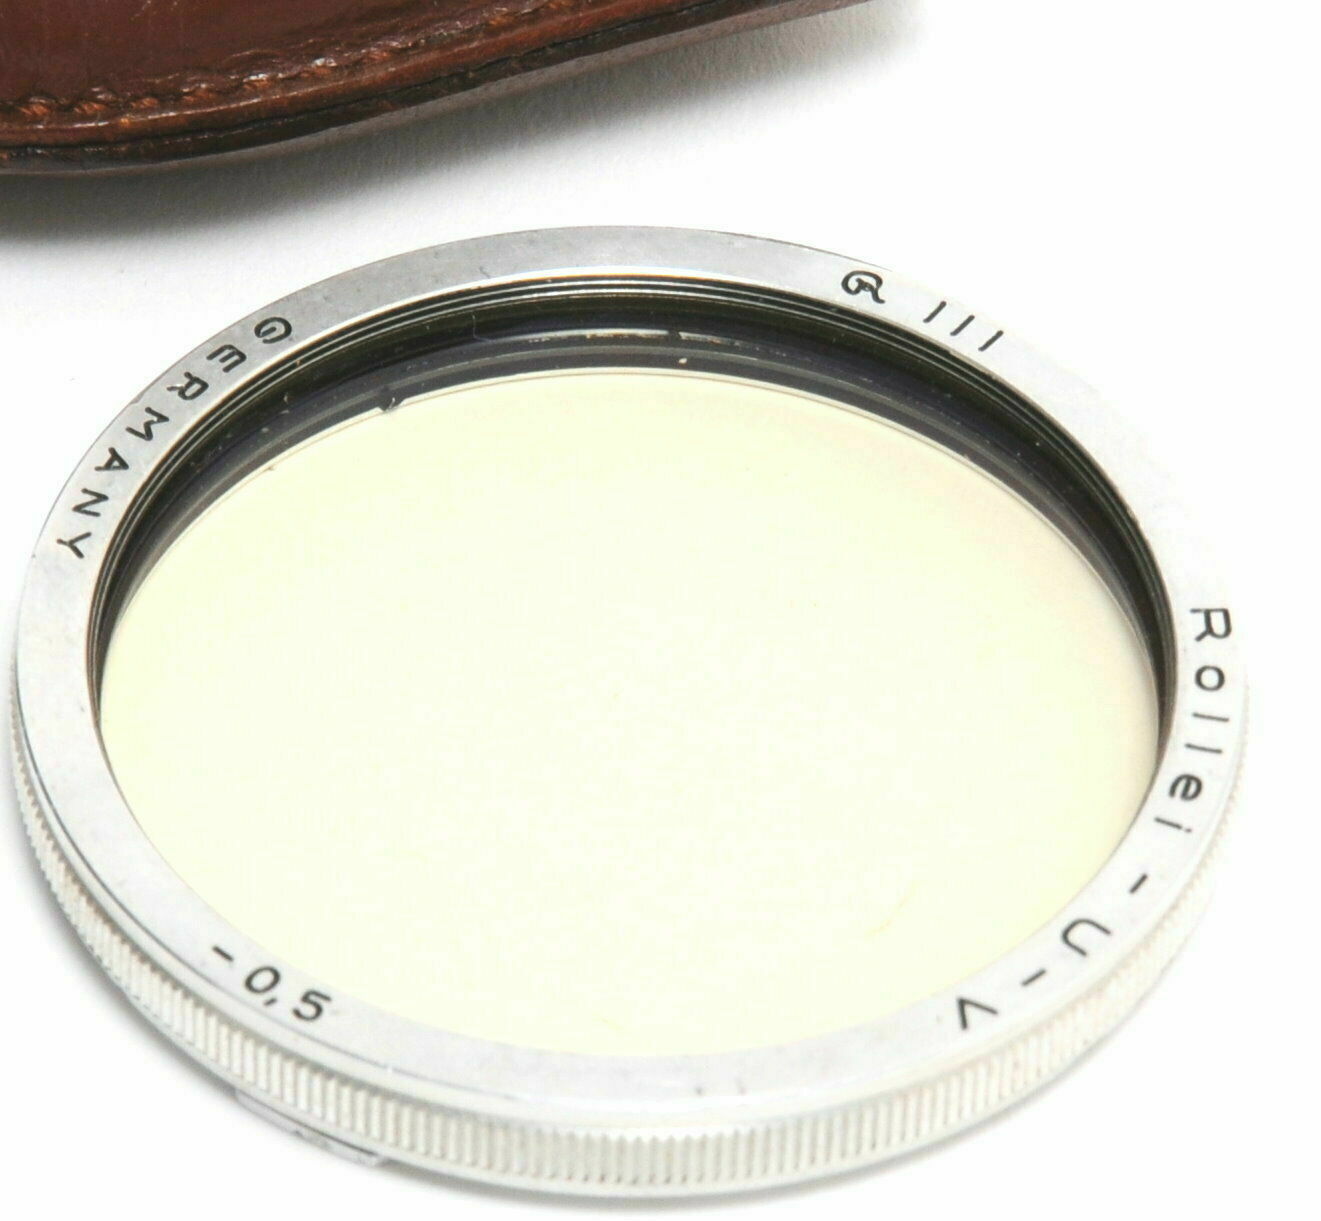 Rollei Uv Filter Bay Iii -0.5 With Case